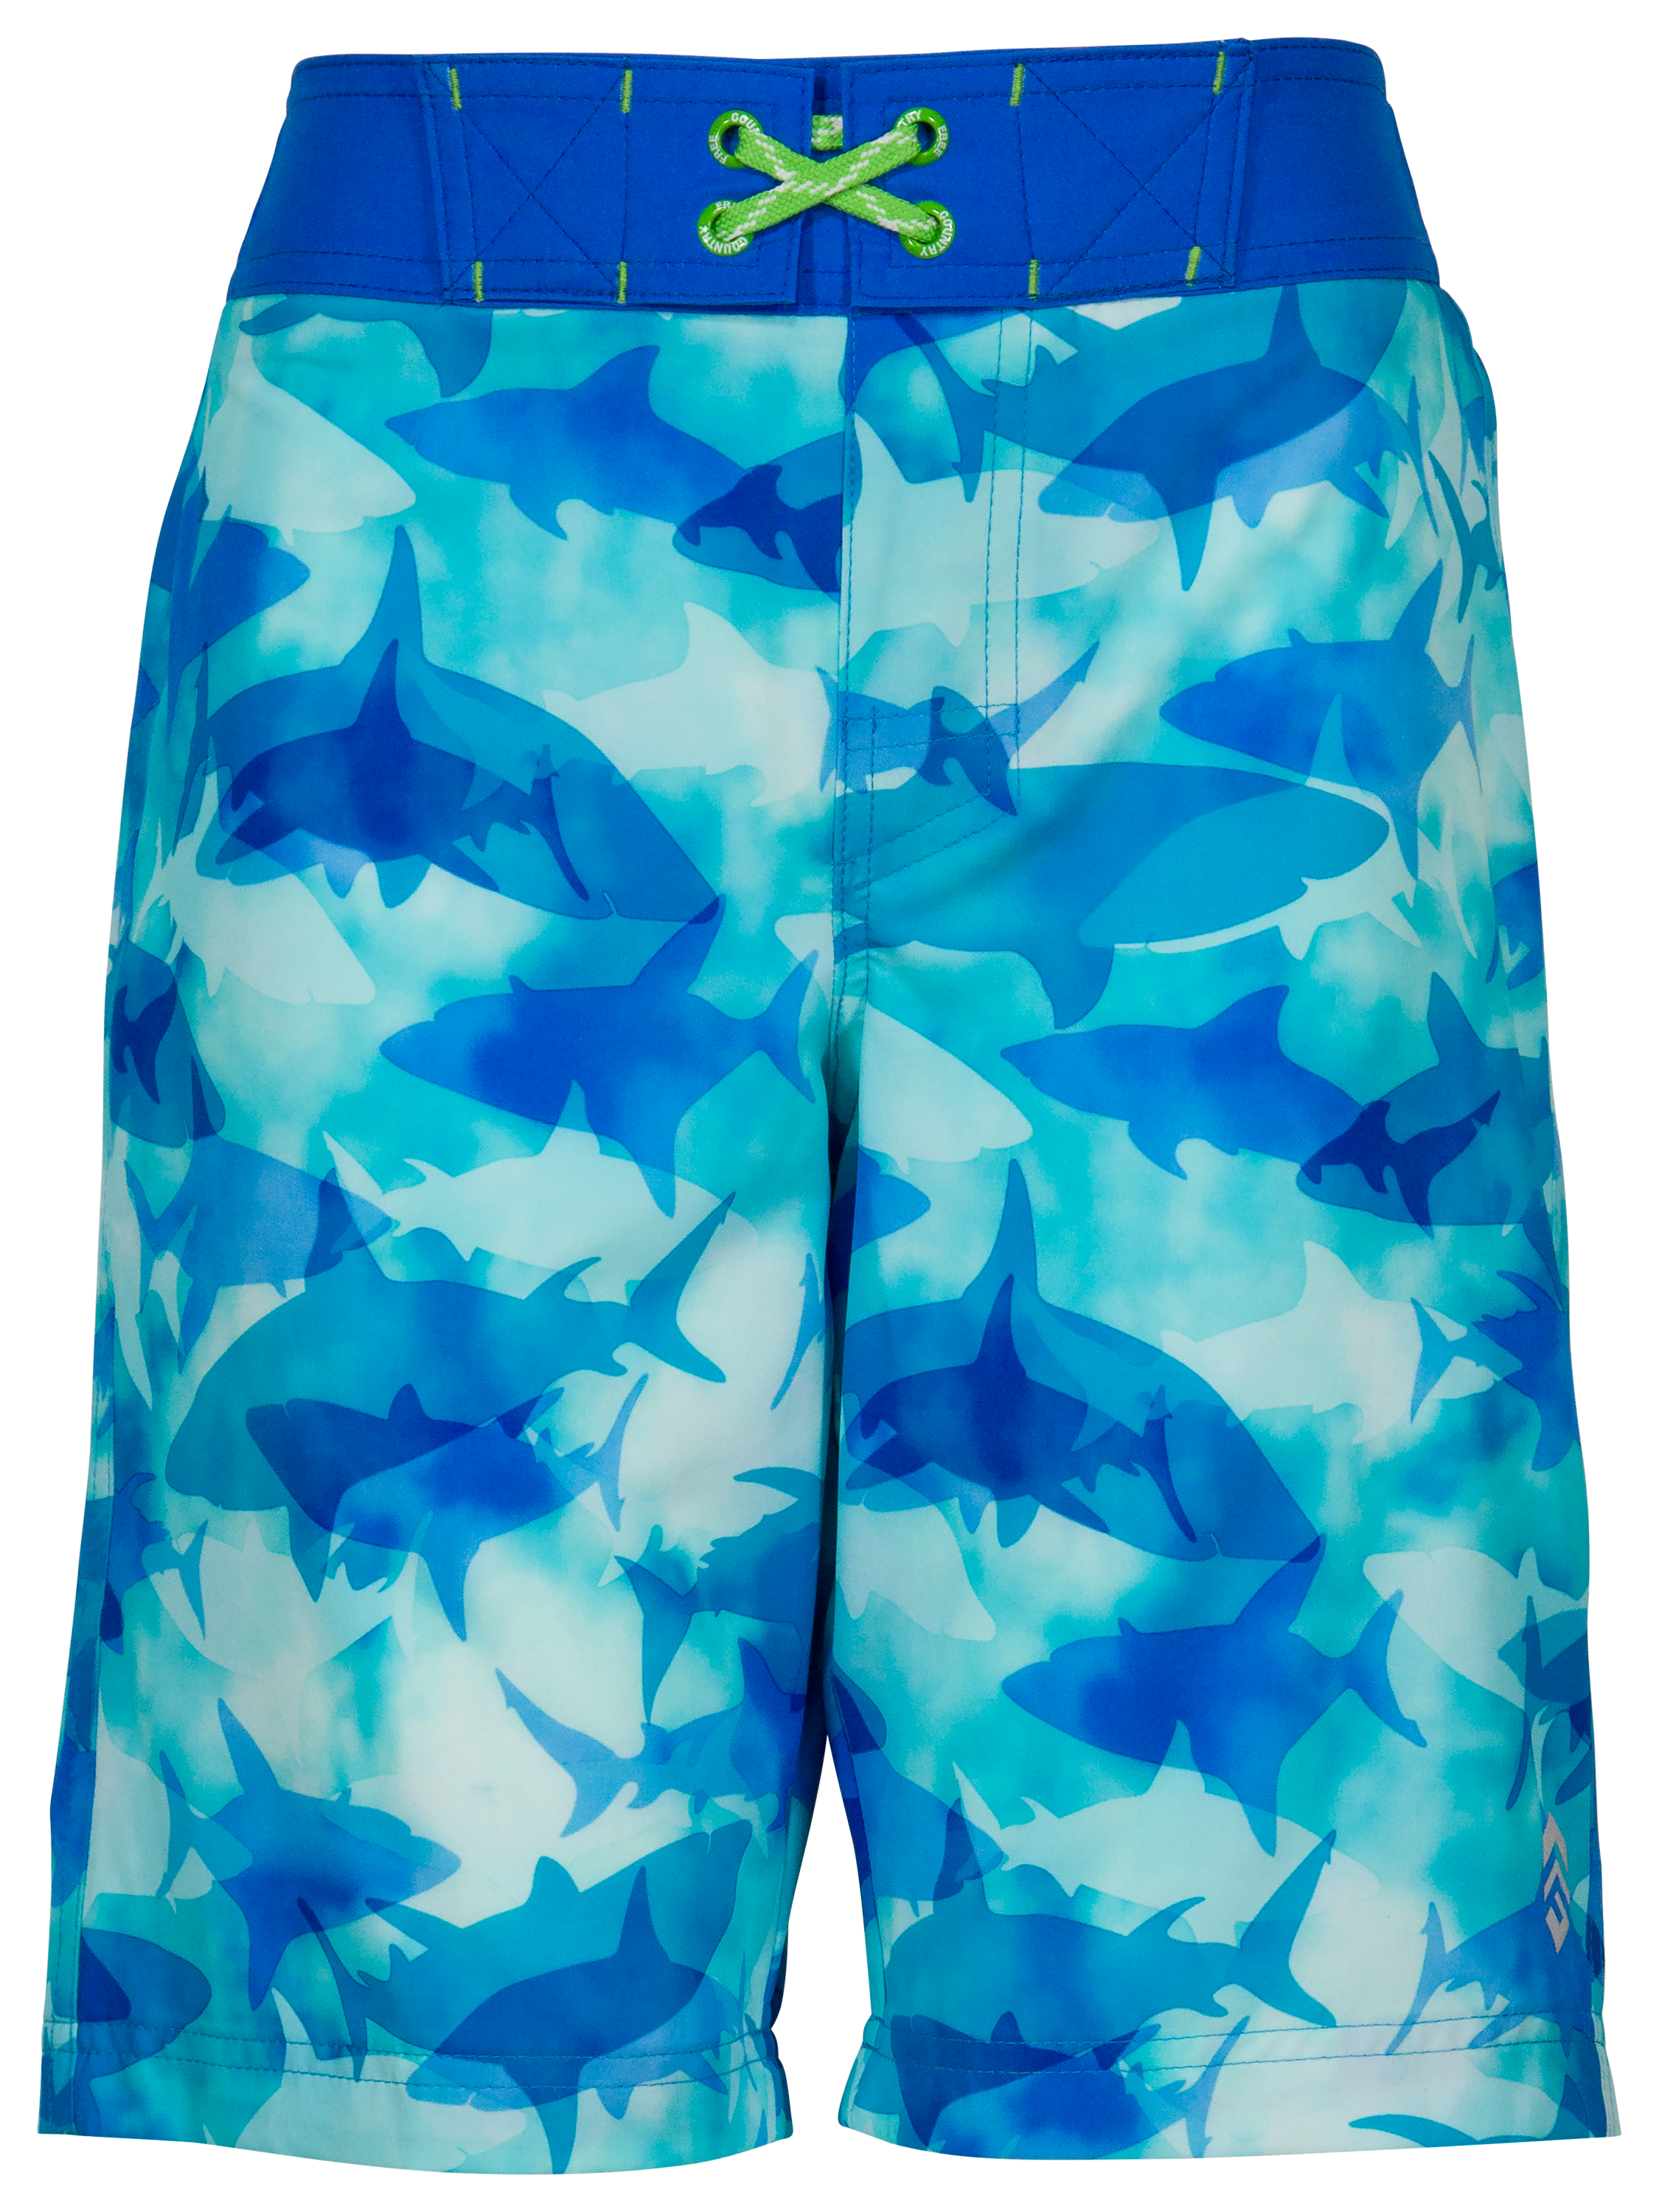 Free Country School of Sharks Board Shorts for Boys - Aqua - 4 -  Free Country Ltd